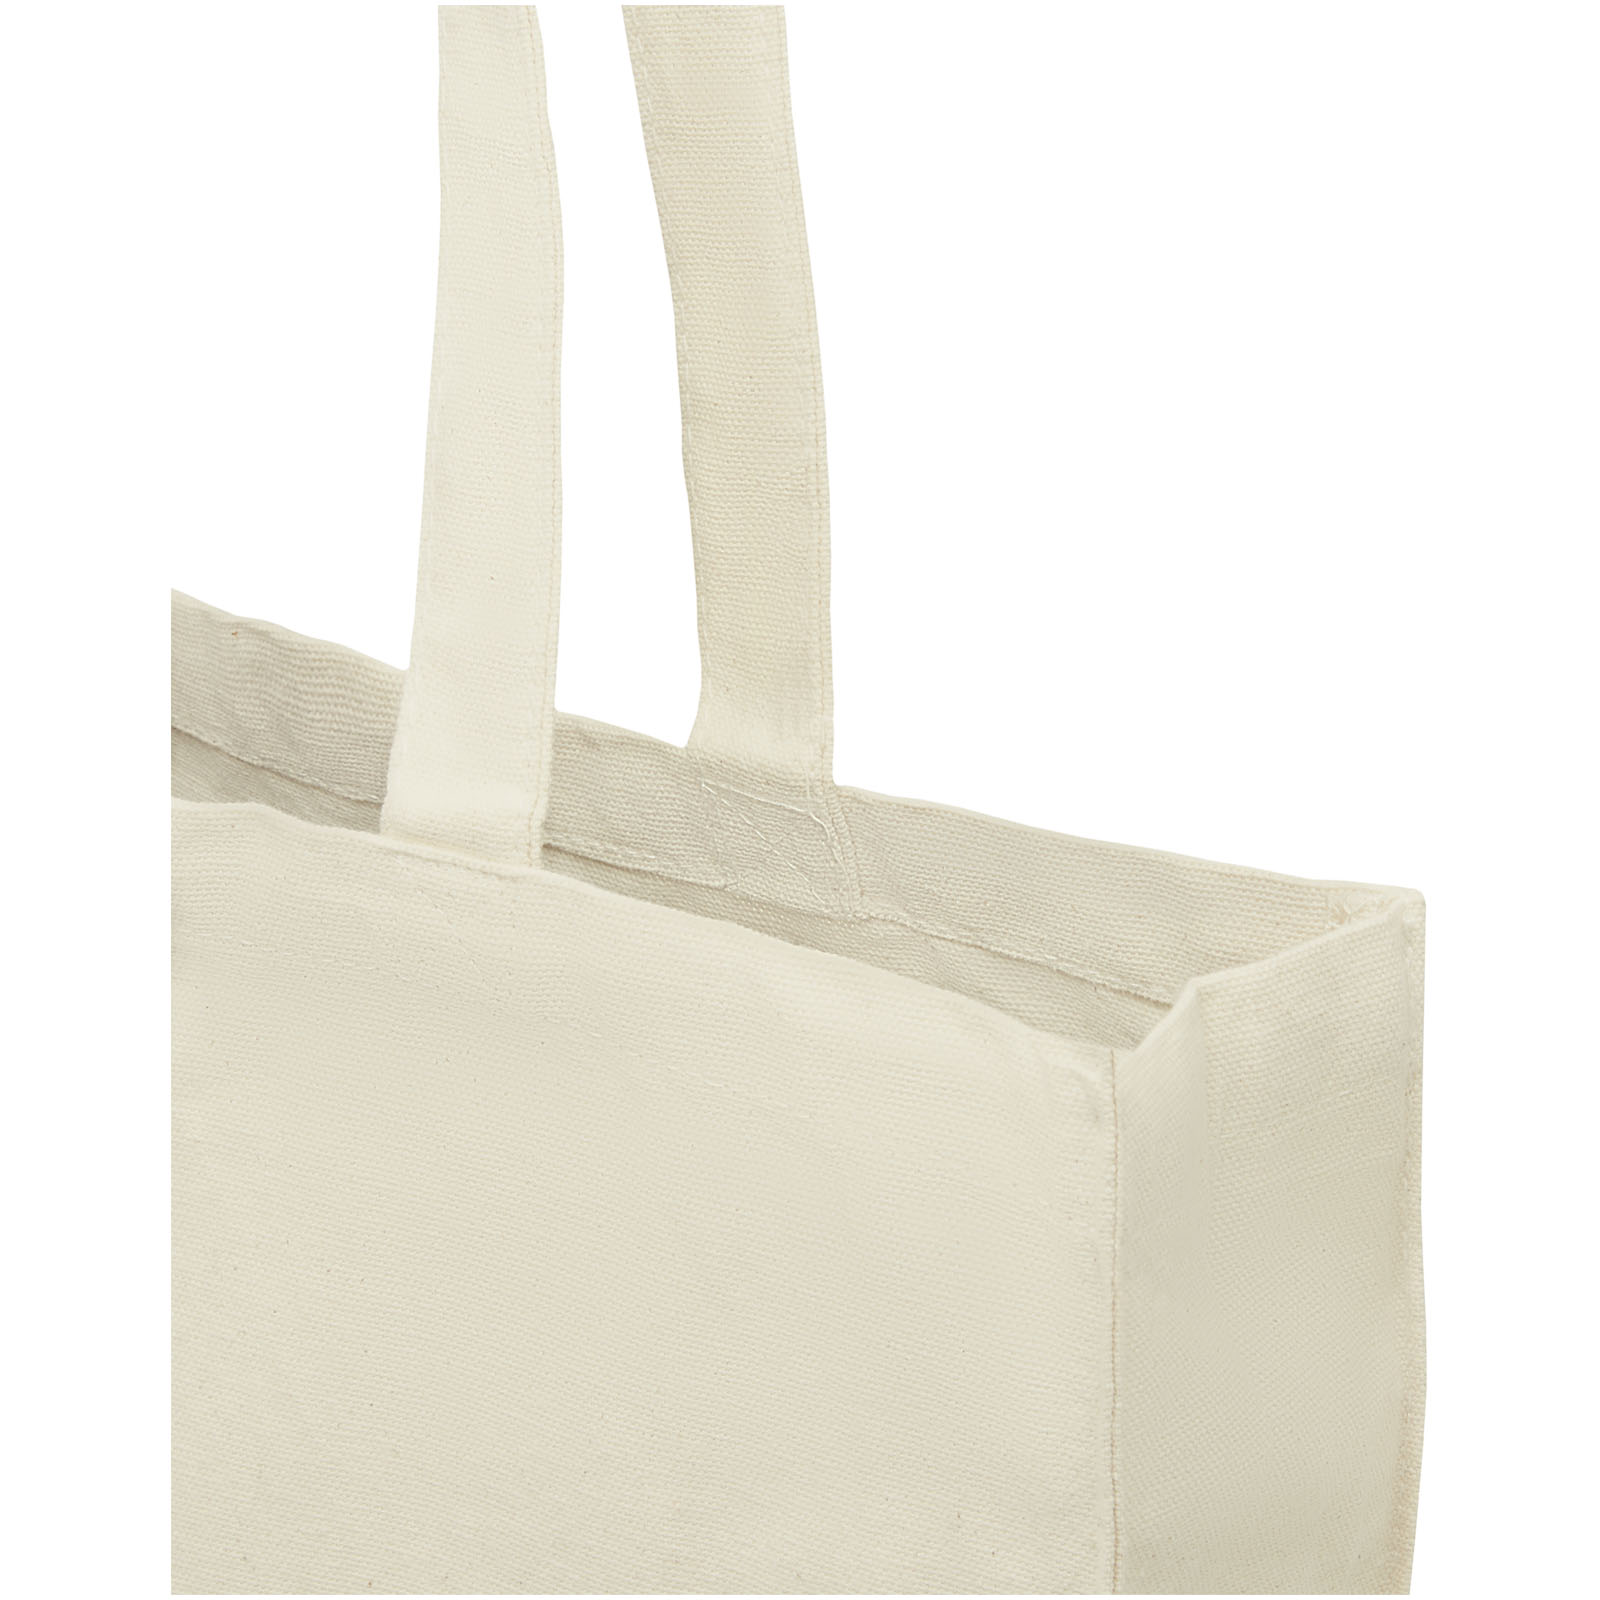 Advertising Shopping & Tote Bags - Odessa 220 g/m² cotton tote bag 13L - 3